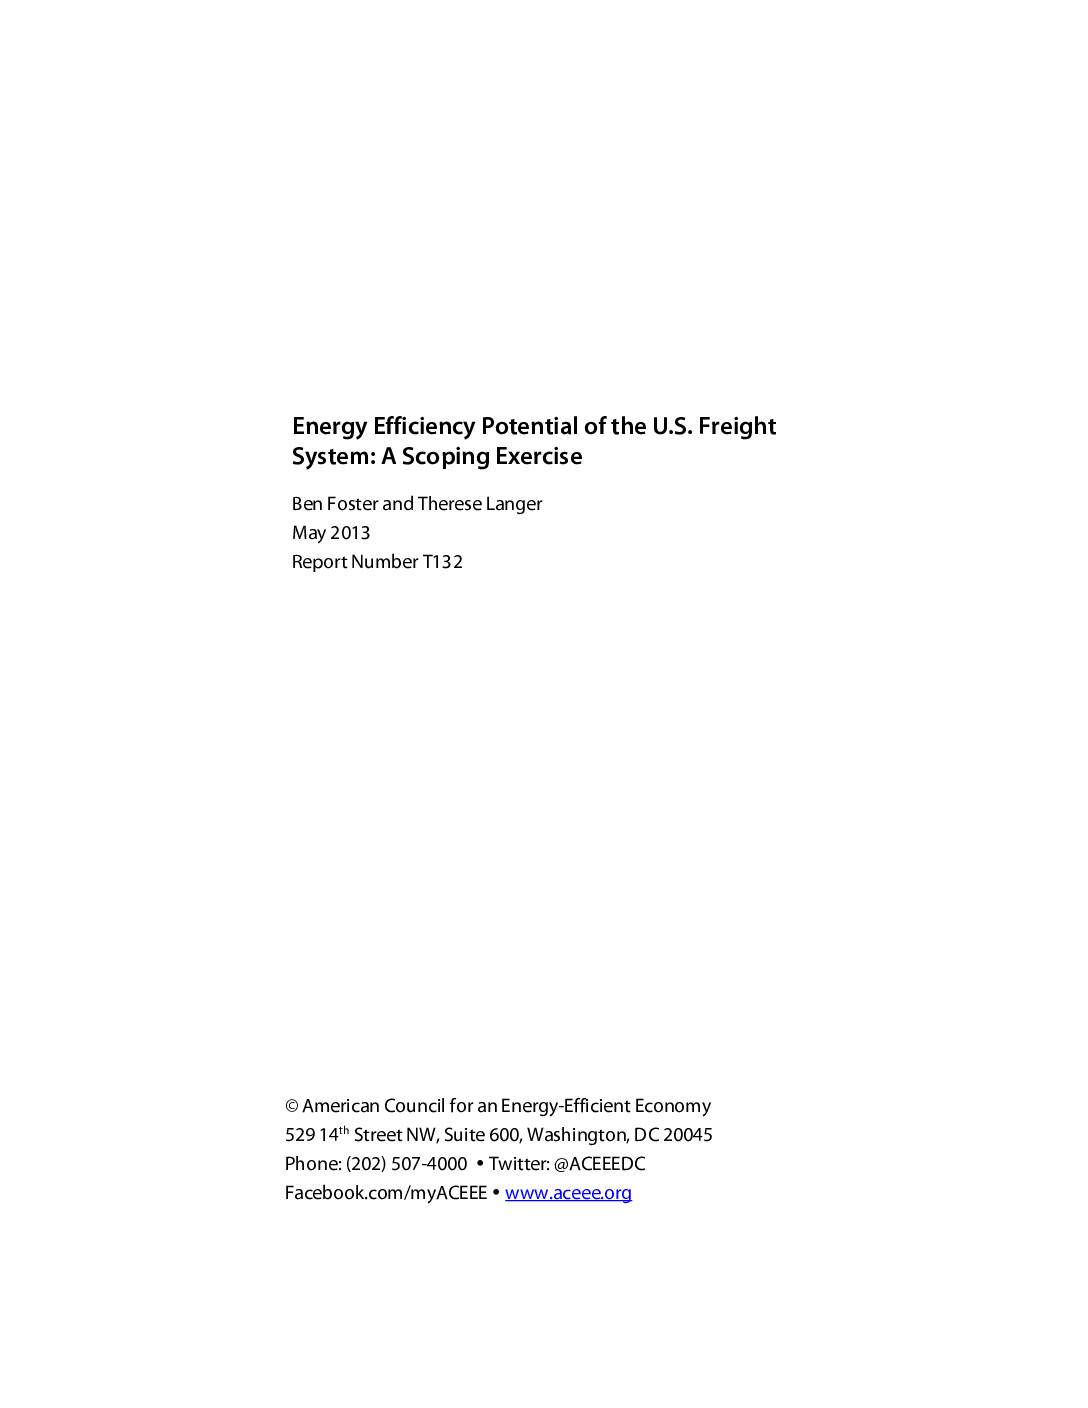 Energy Efficiency Potential of the U.S. Freight System: A Scoping Exercise